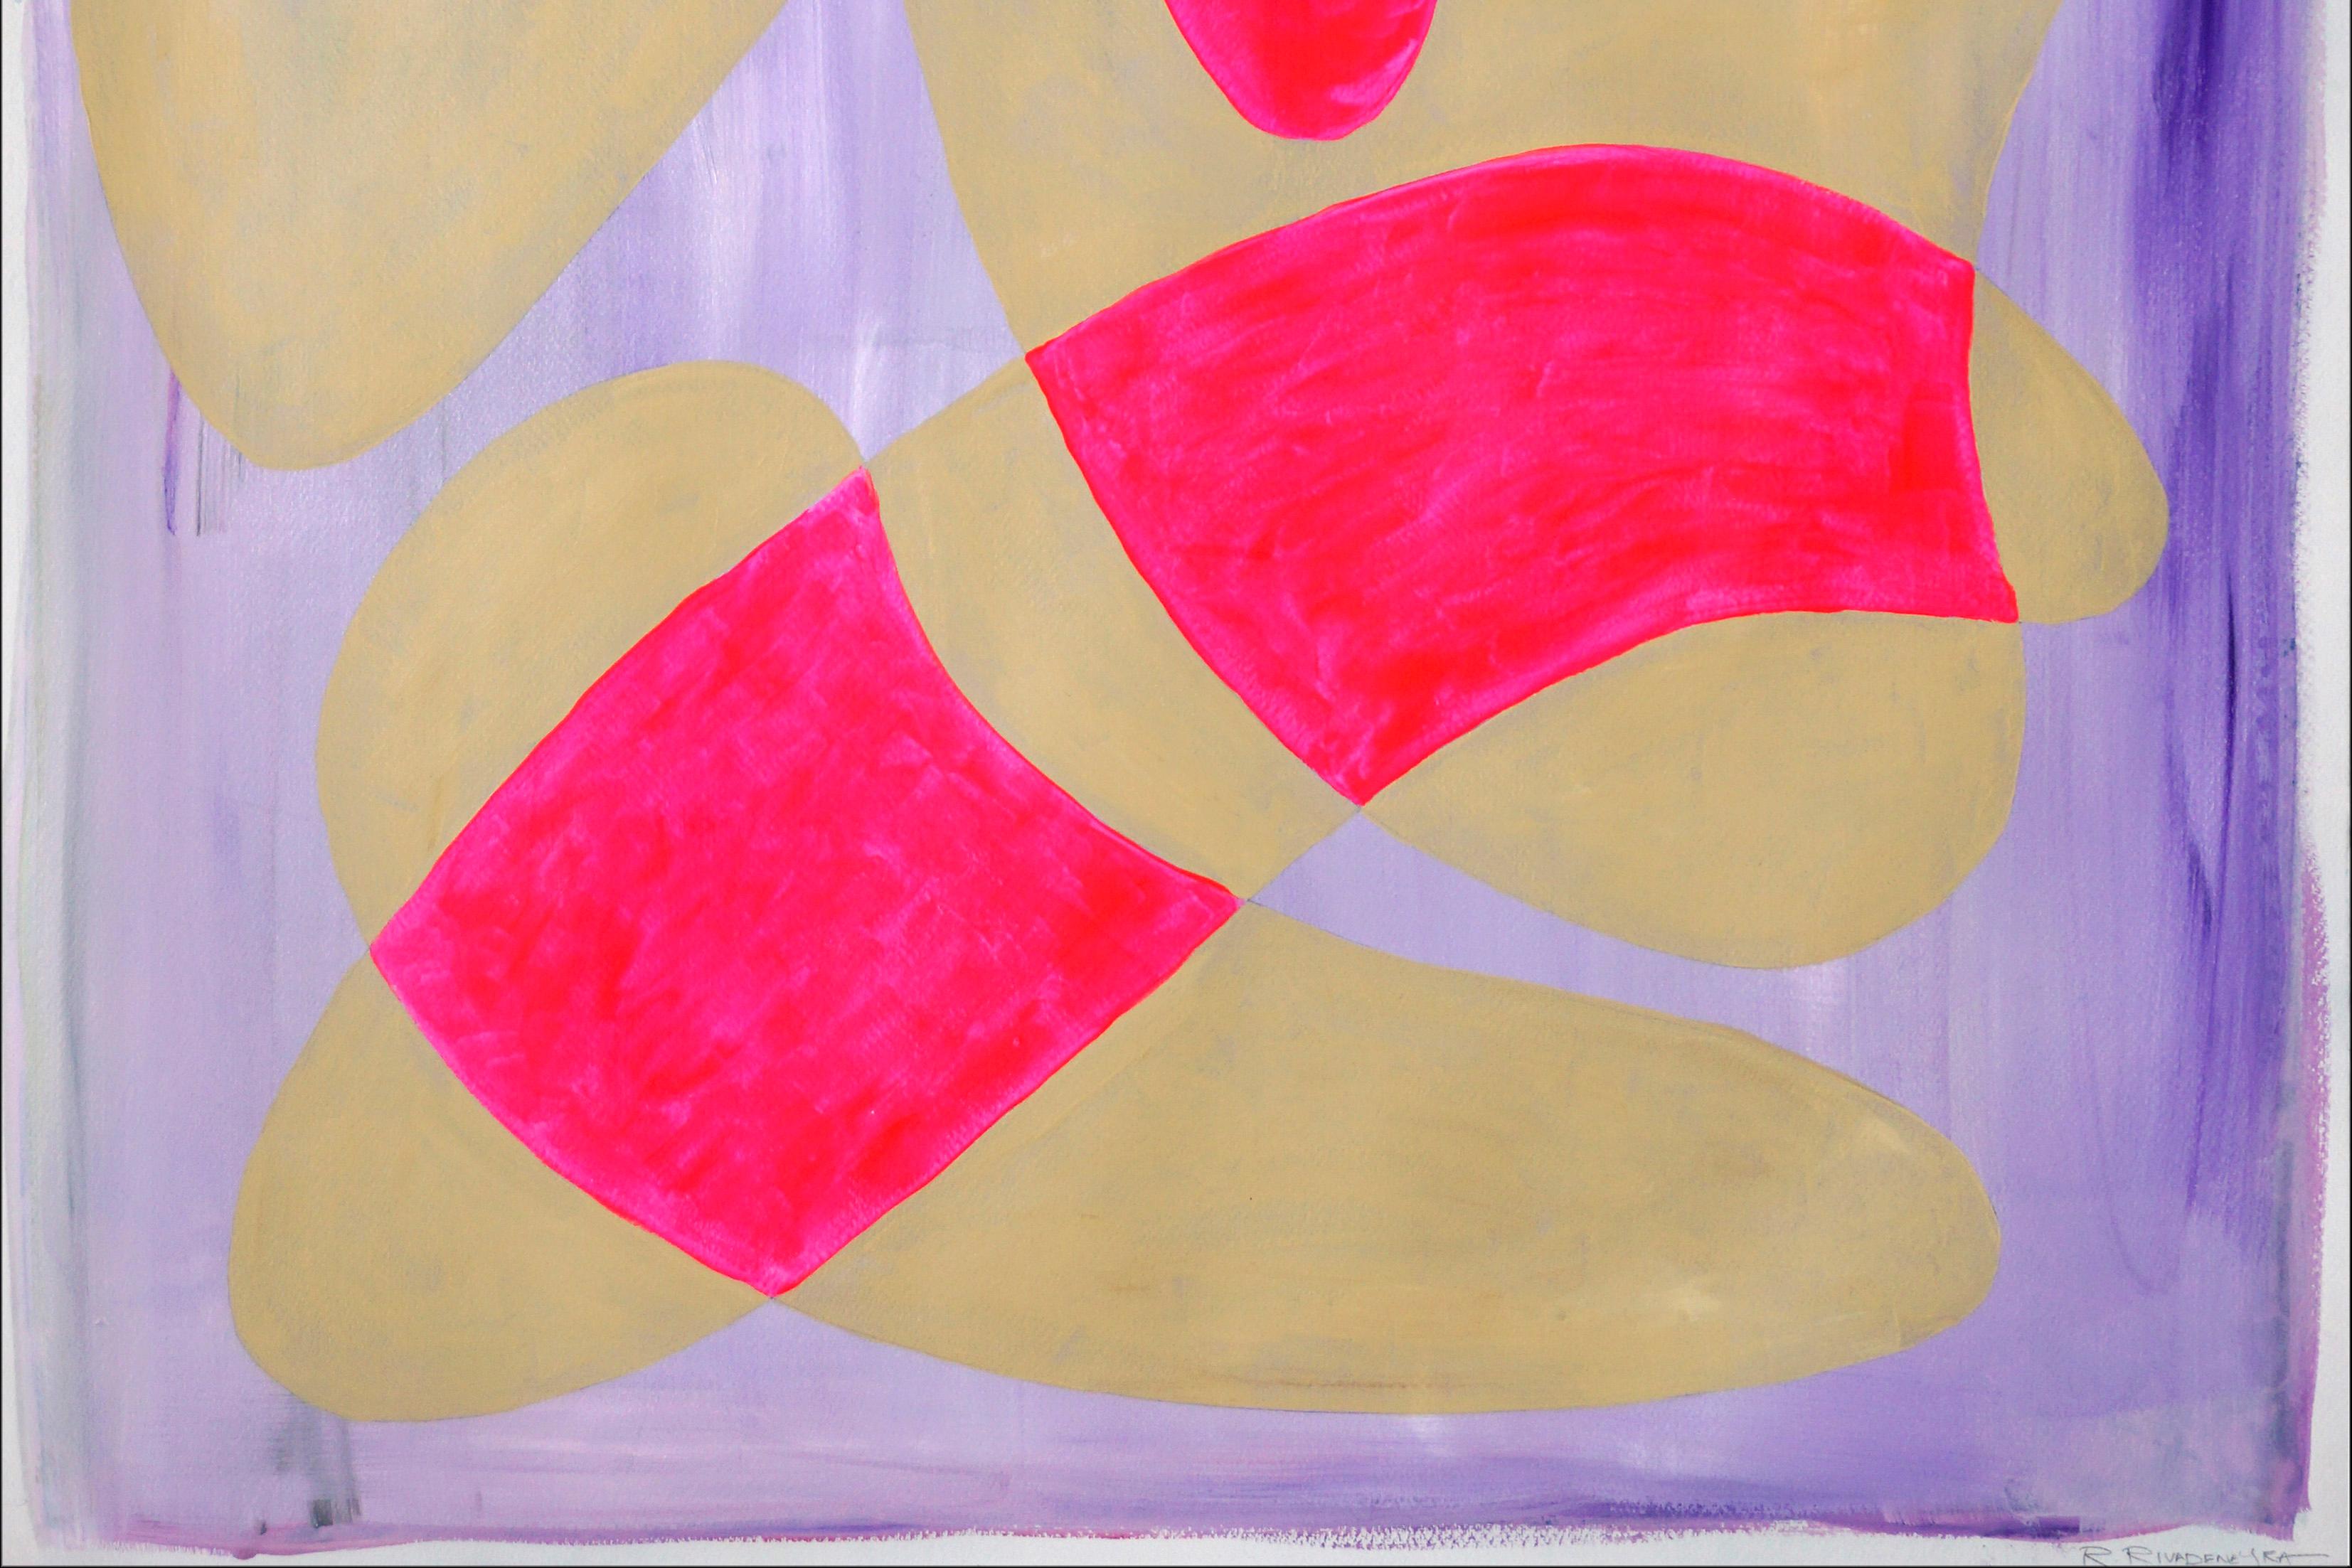 Hot Pink and Cream Curves, Avant Garde Shapes with Soft Urban Style Background  - Street Art Painting by Ryan Rivadeneyra